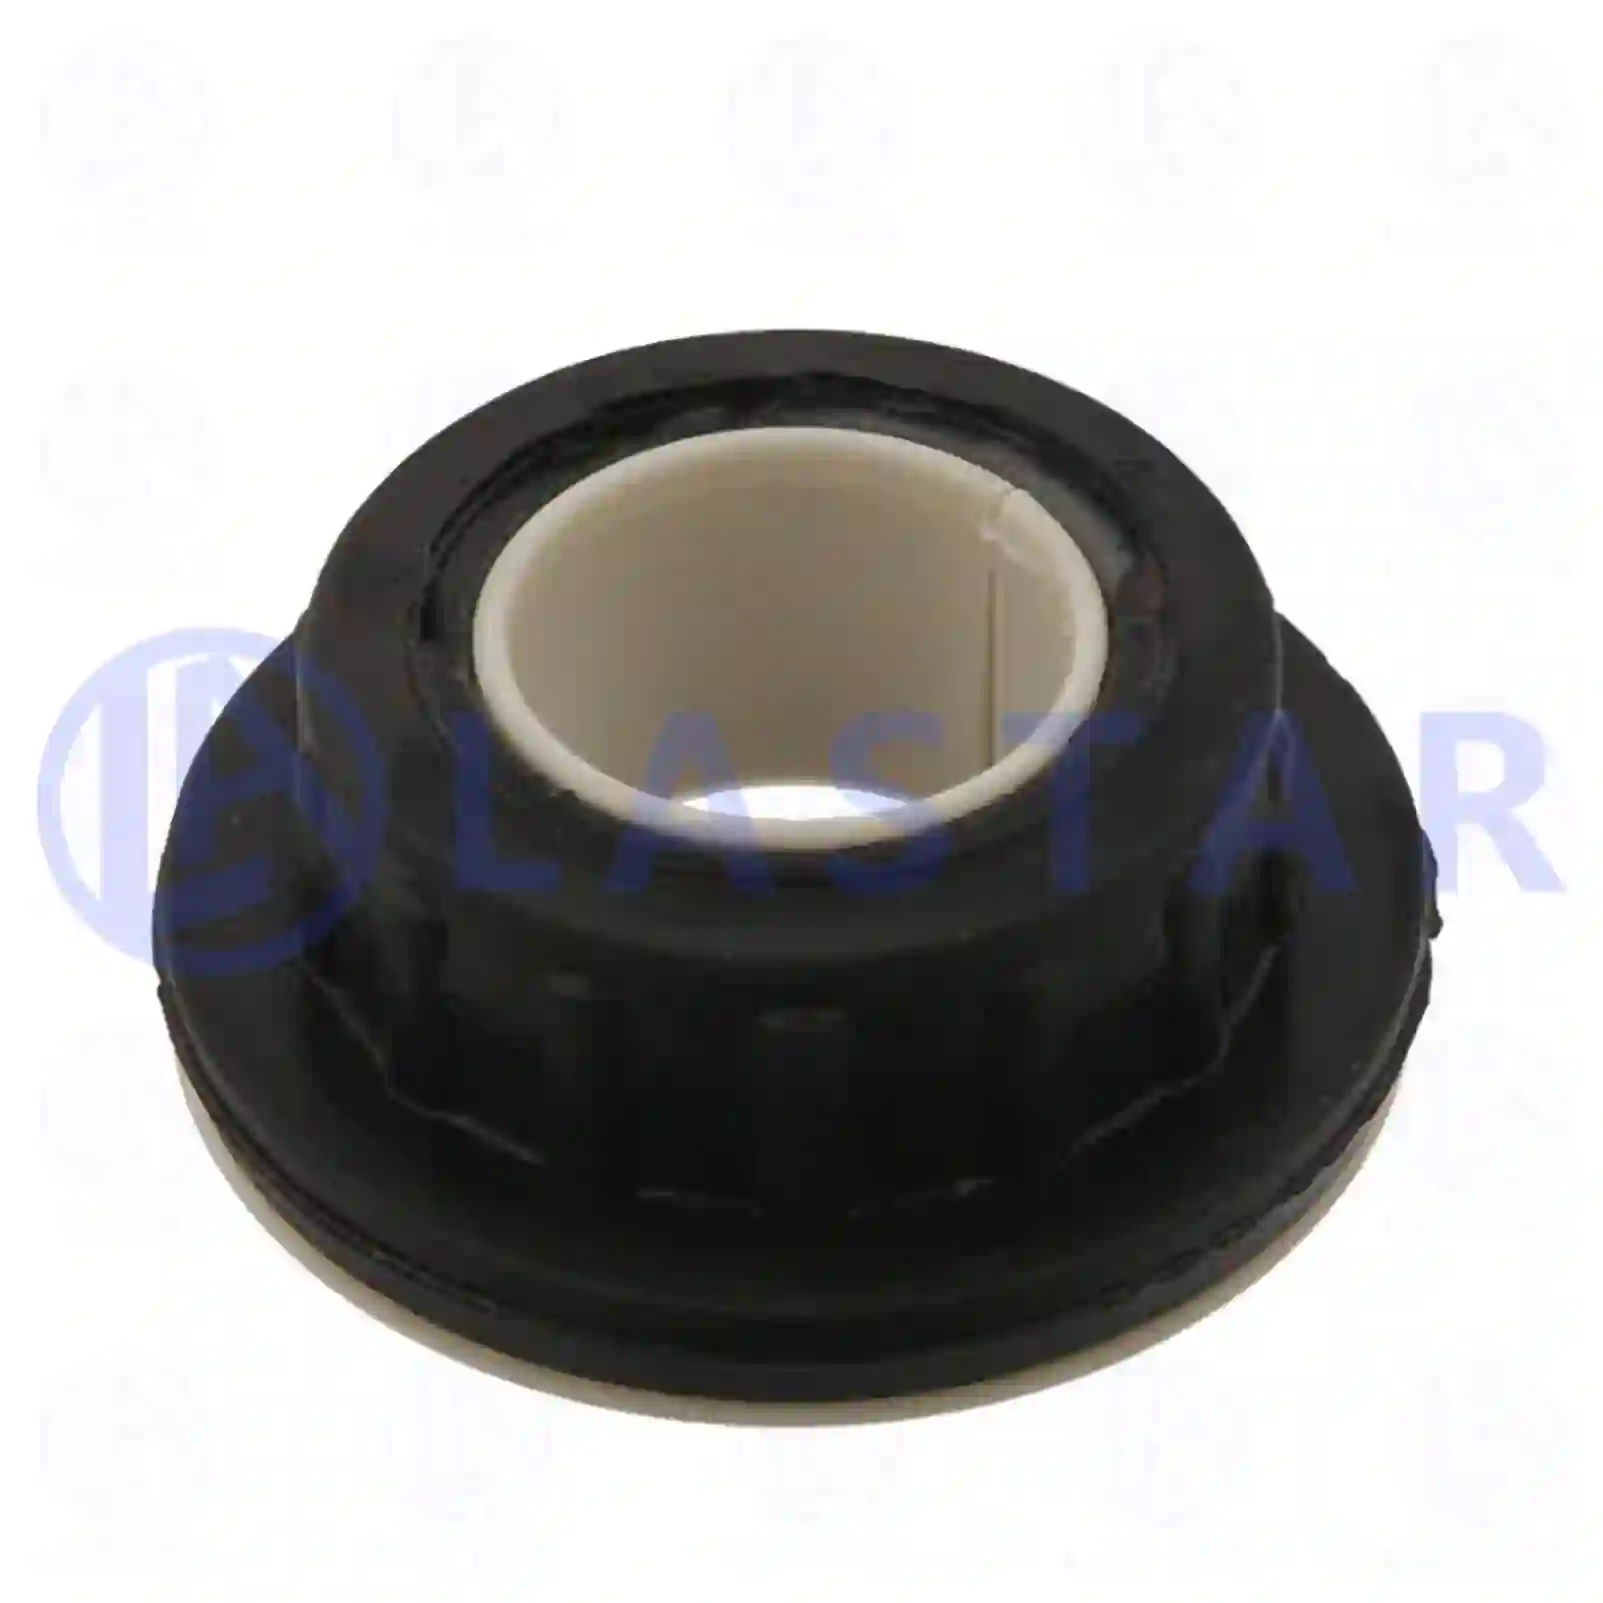 Bearing, control arm, 77731278, 500336356, 500336357, 500336358, 500336359, 504039506, 504086381 ||  77731278 Lastar Spare Part | Truck Spare Parts, Auotomotive Spare Parts Bearing, control arm, 77731278, 500336356, 500336357, 500336358, 500336359, 504039506, 504086381 ||  77731278 Lastar Spare Part | Truck Spare Parts, Auotomotive Spare Parts